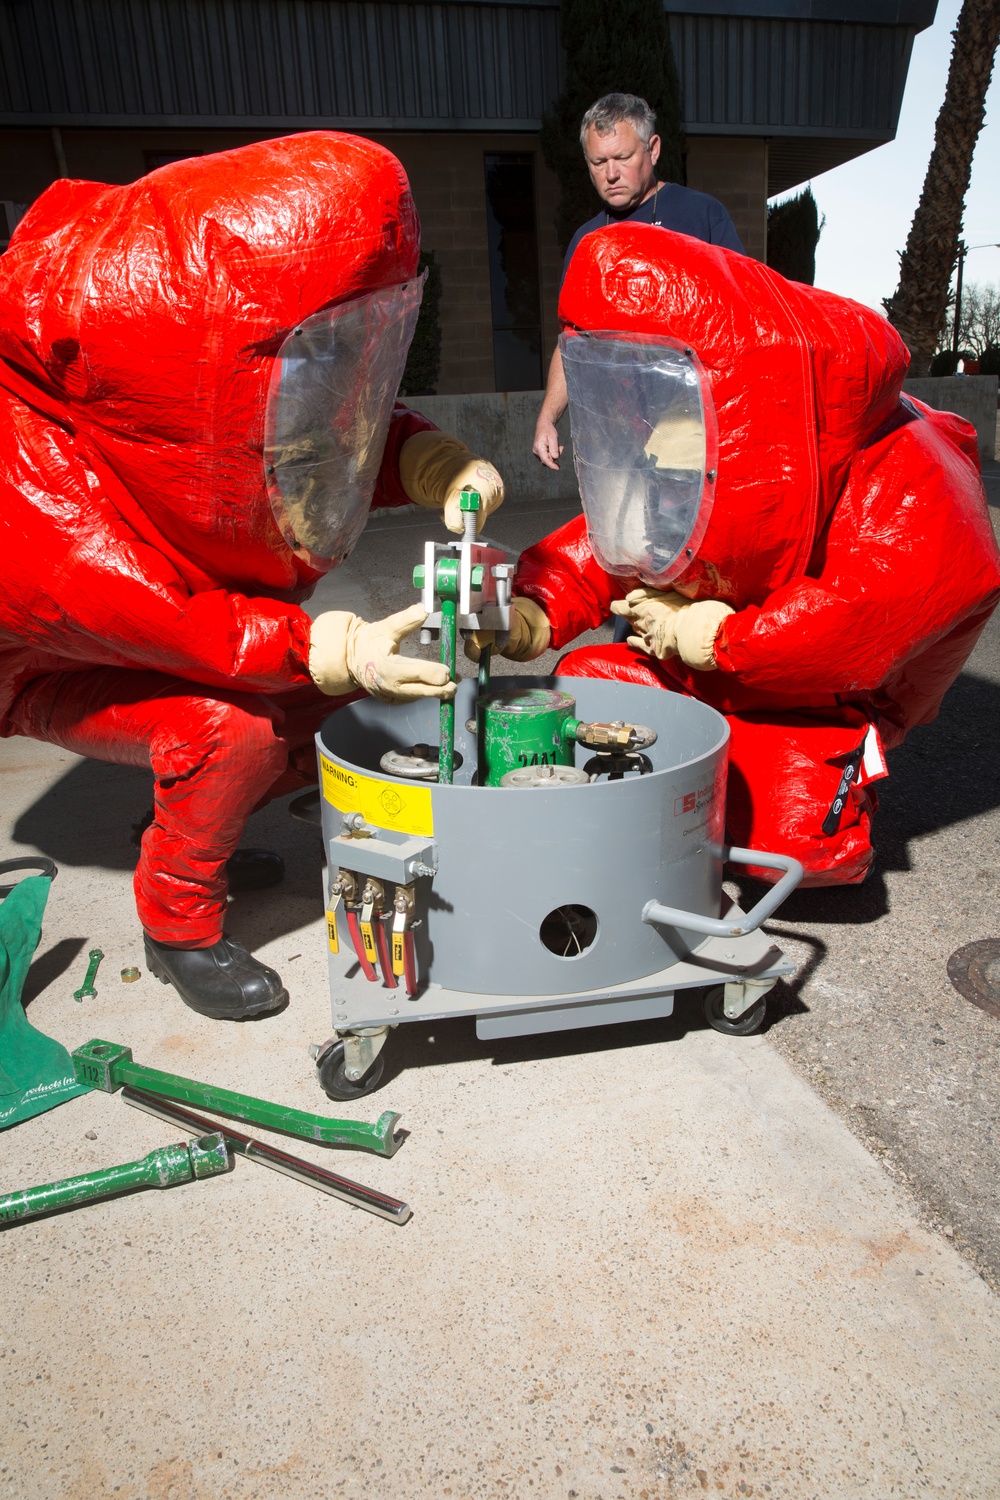 MCLB Barstow Fire Department Trains for HAZMAT Situations